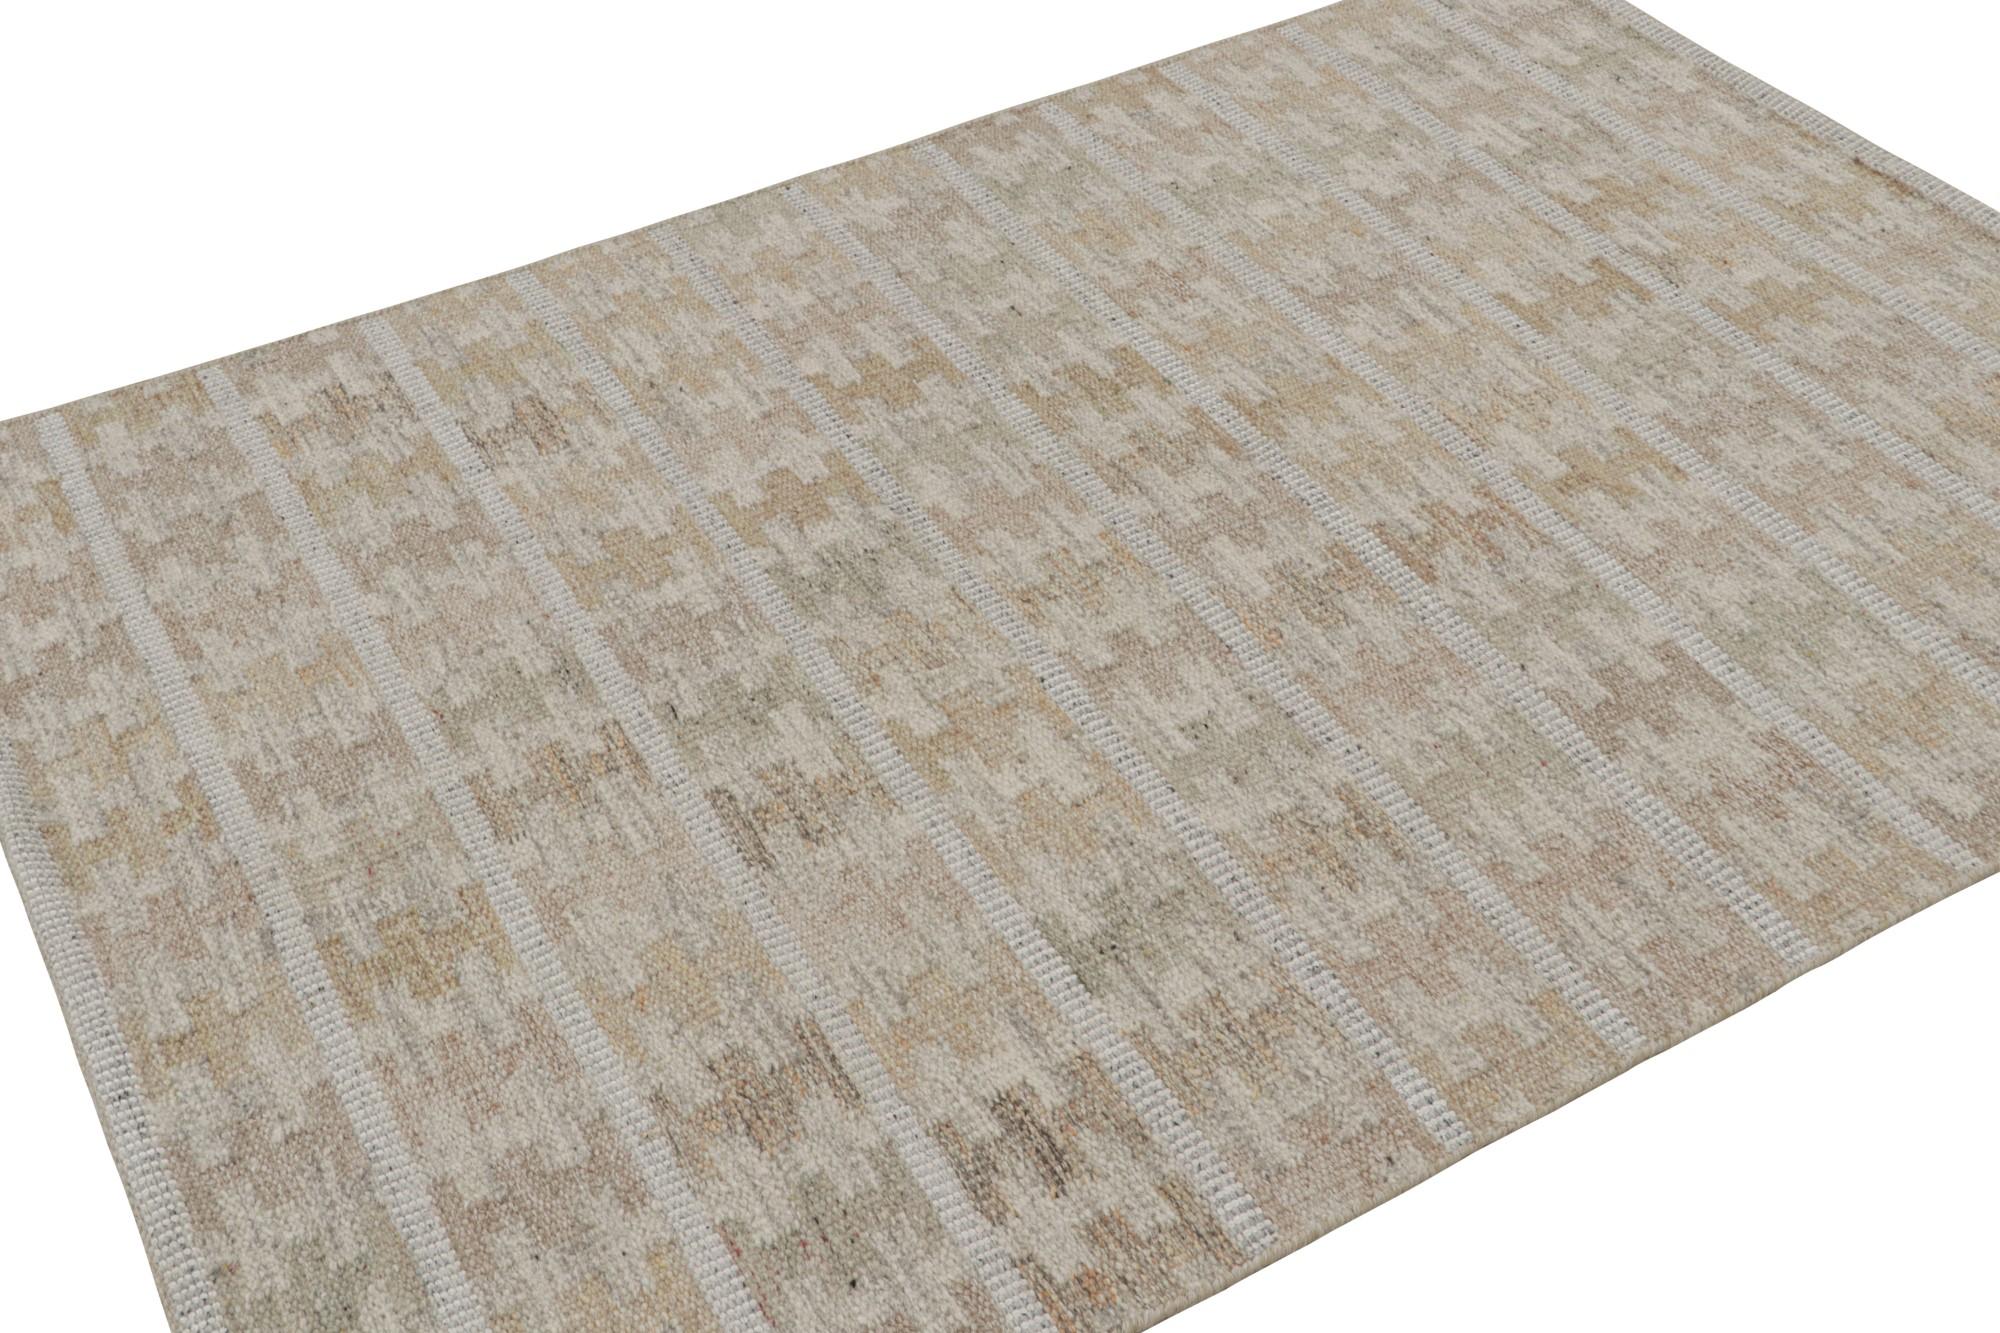 A smart 5x7 Swedish kilim from our award-winning Scandinavian flat weave collection. Handwoven in wool & undyed natural yarns.

On the Design: 

This rug enjoys geometric patterns in beige-brown, gray with other neutral tones. Keen eyes will admire